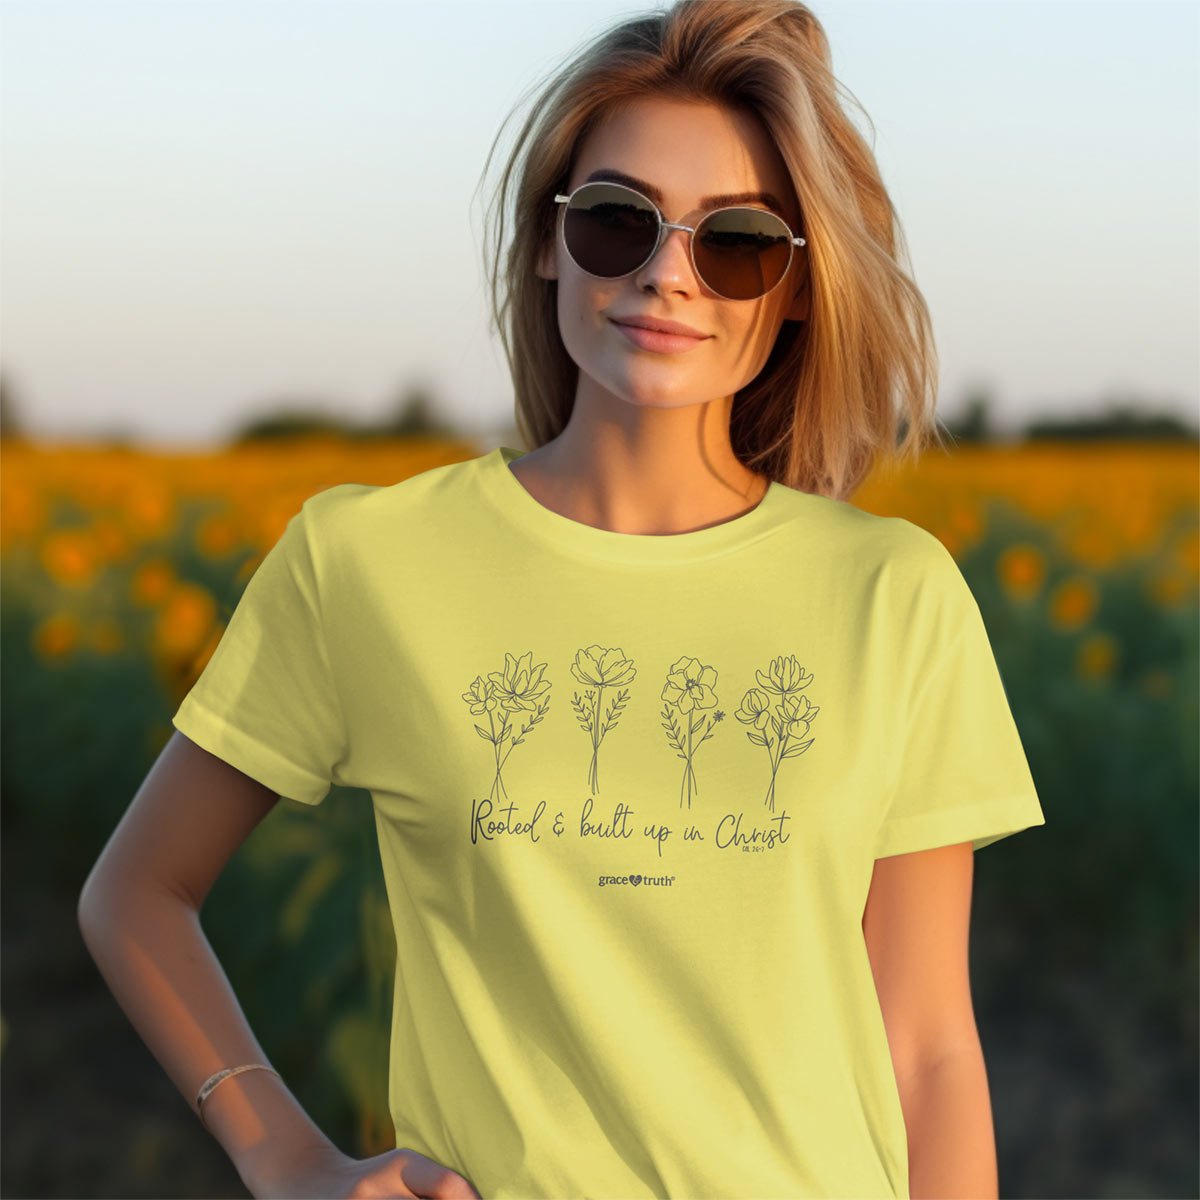 grace & truth Womens T-Shirt Rooted And Built Up | 2FruitBearers